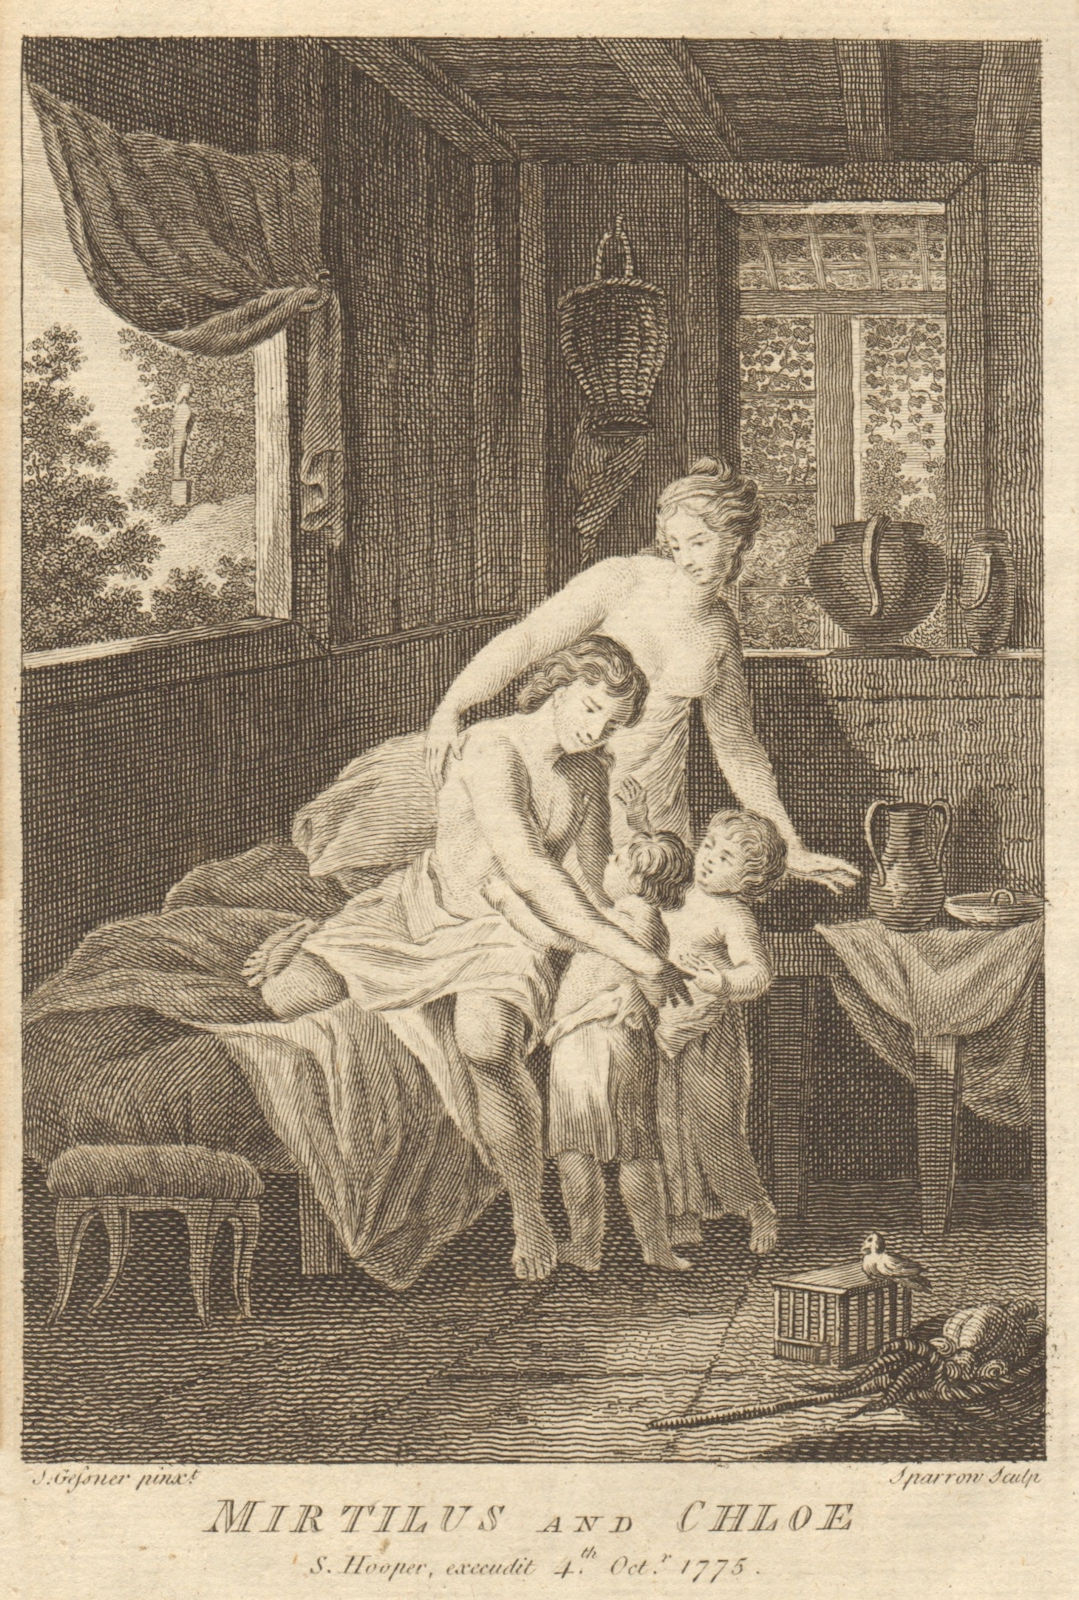 Associate Product Mirtilus and Chloe, from Gessner's Idyls. Family 1776 old antique print